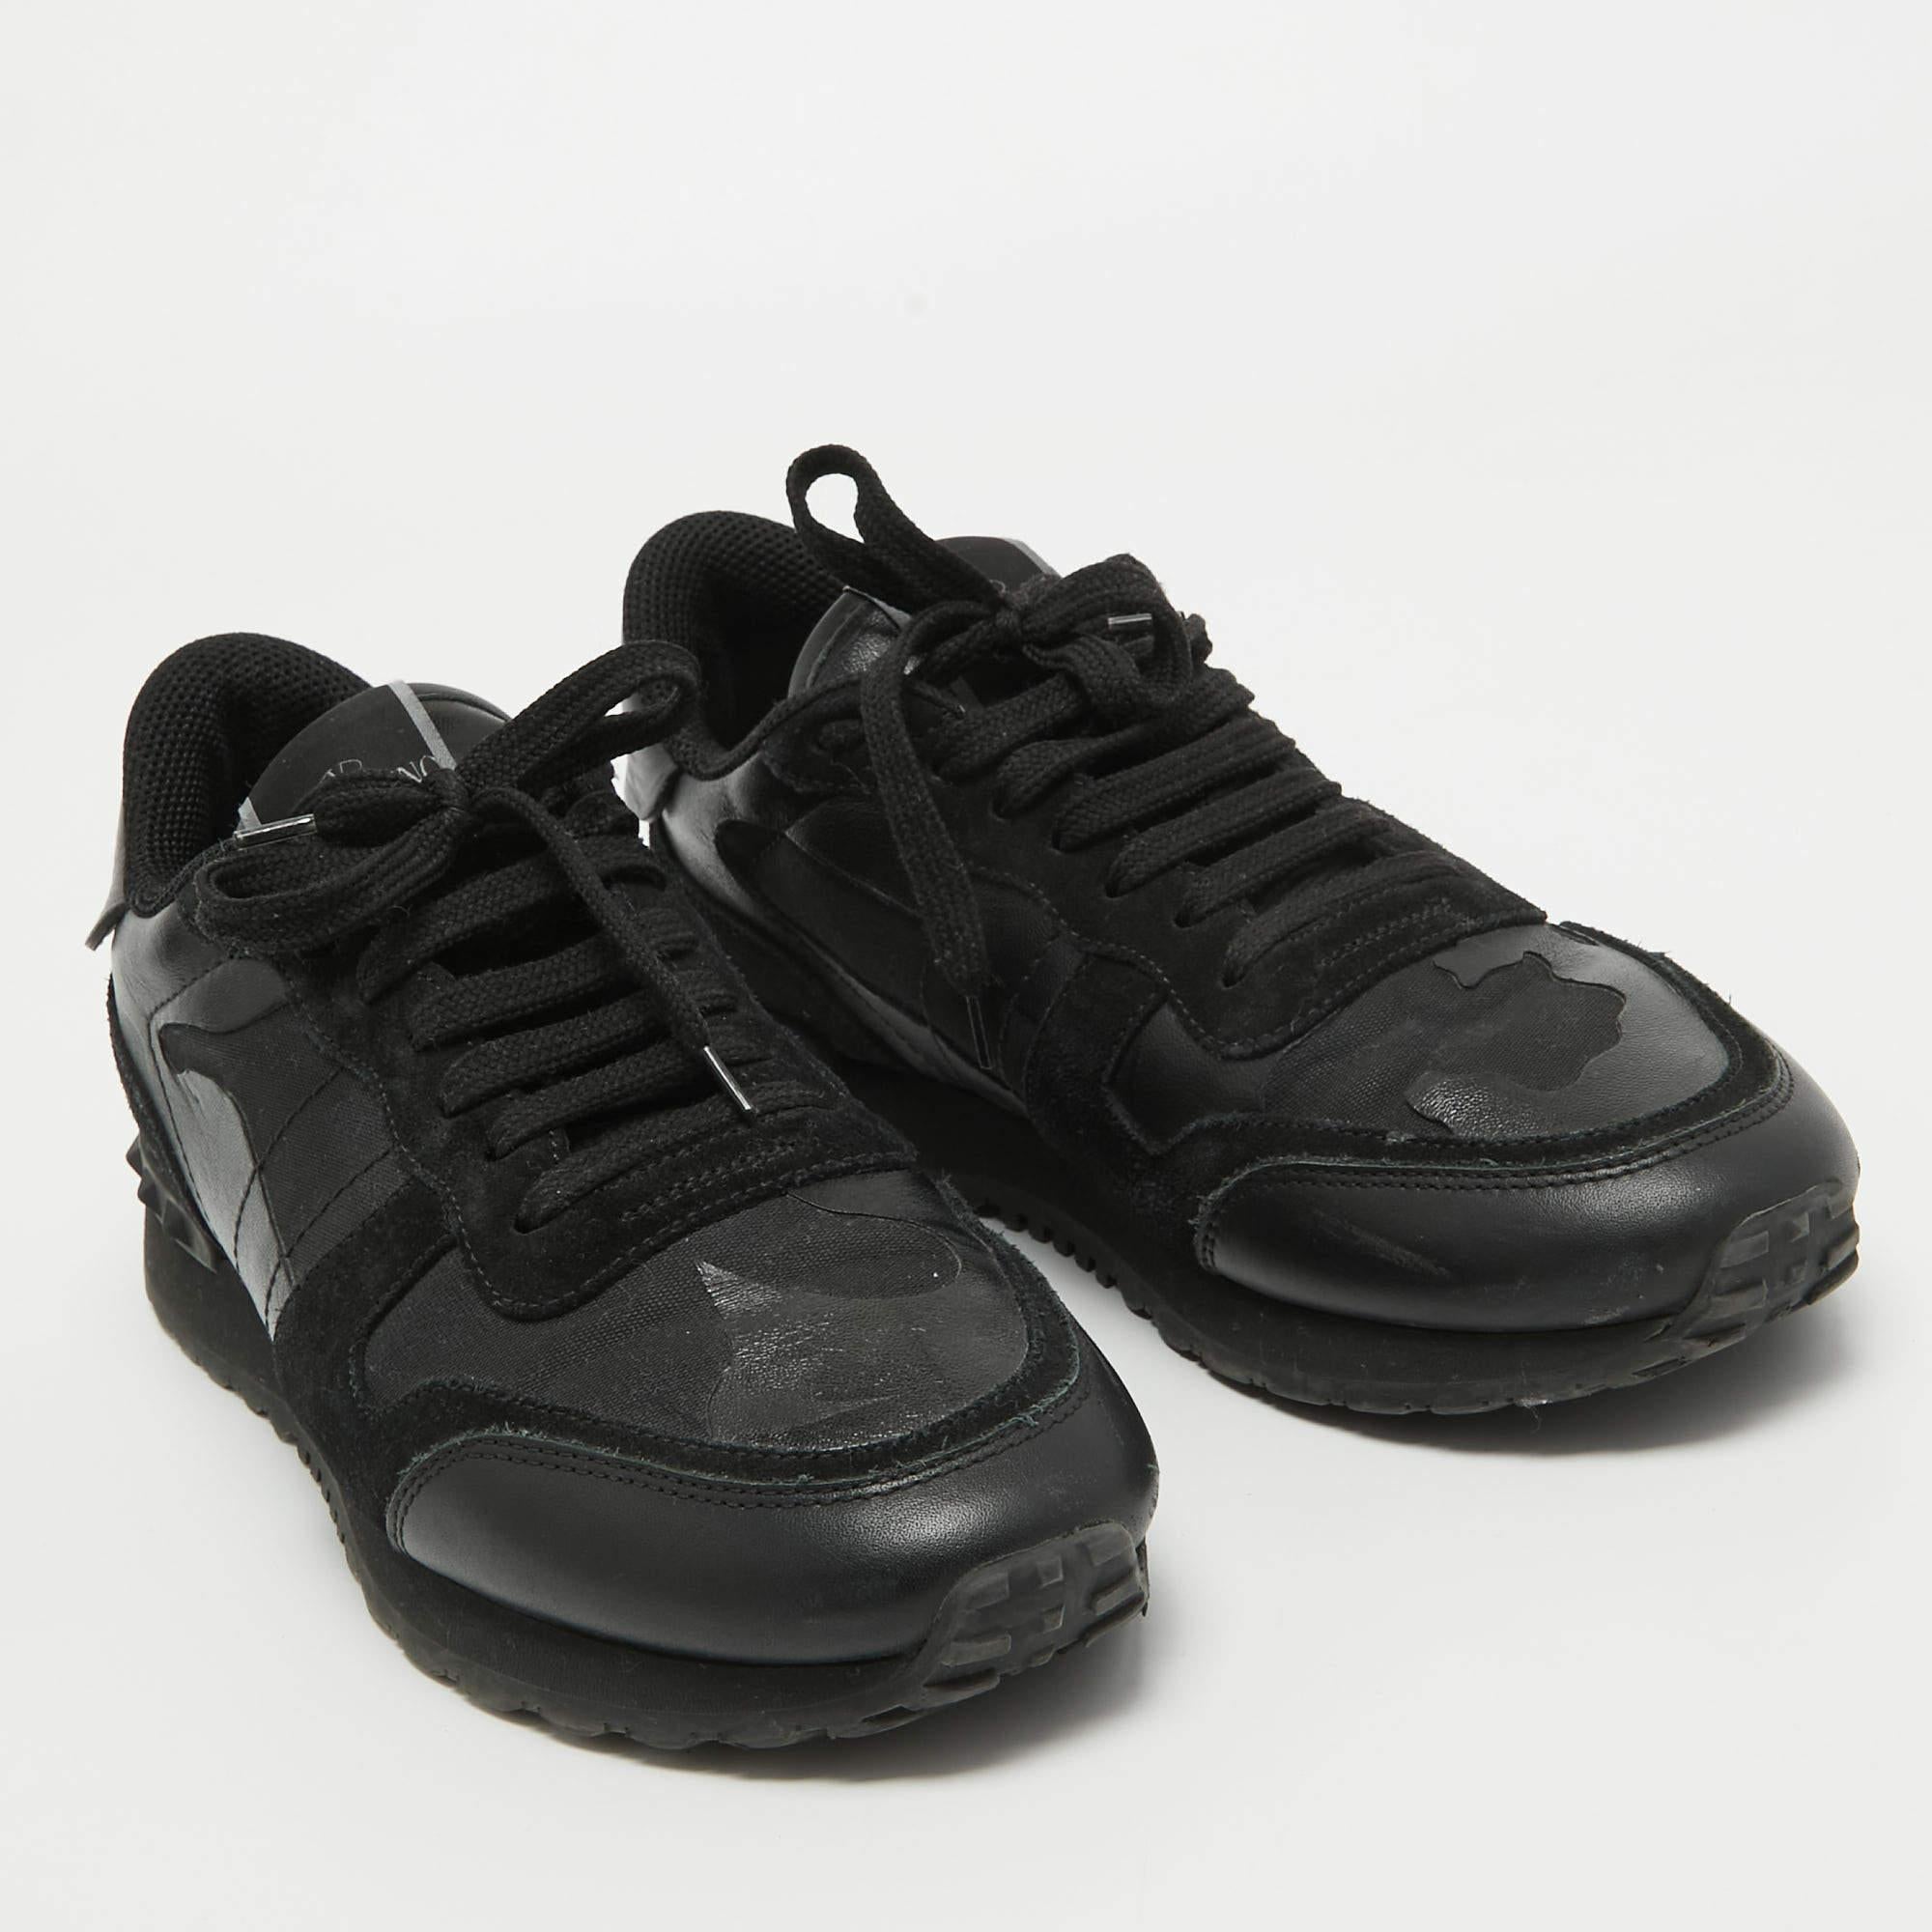 Valentino Black Leather and Suede Rockrunner Law Top Sneakers Size 40 For Sale 1